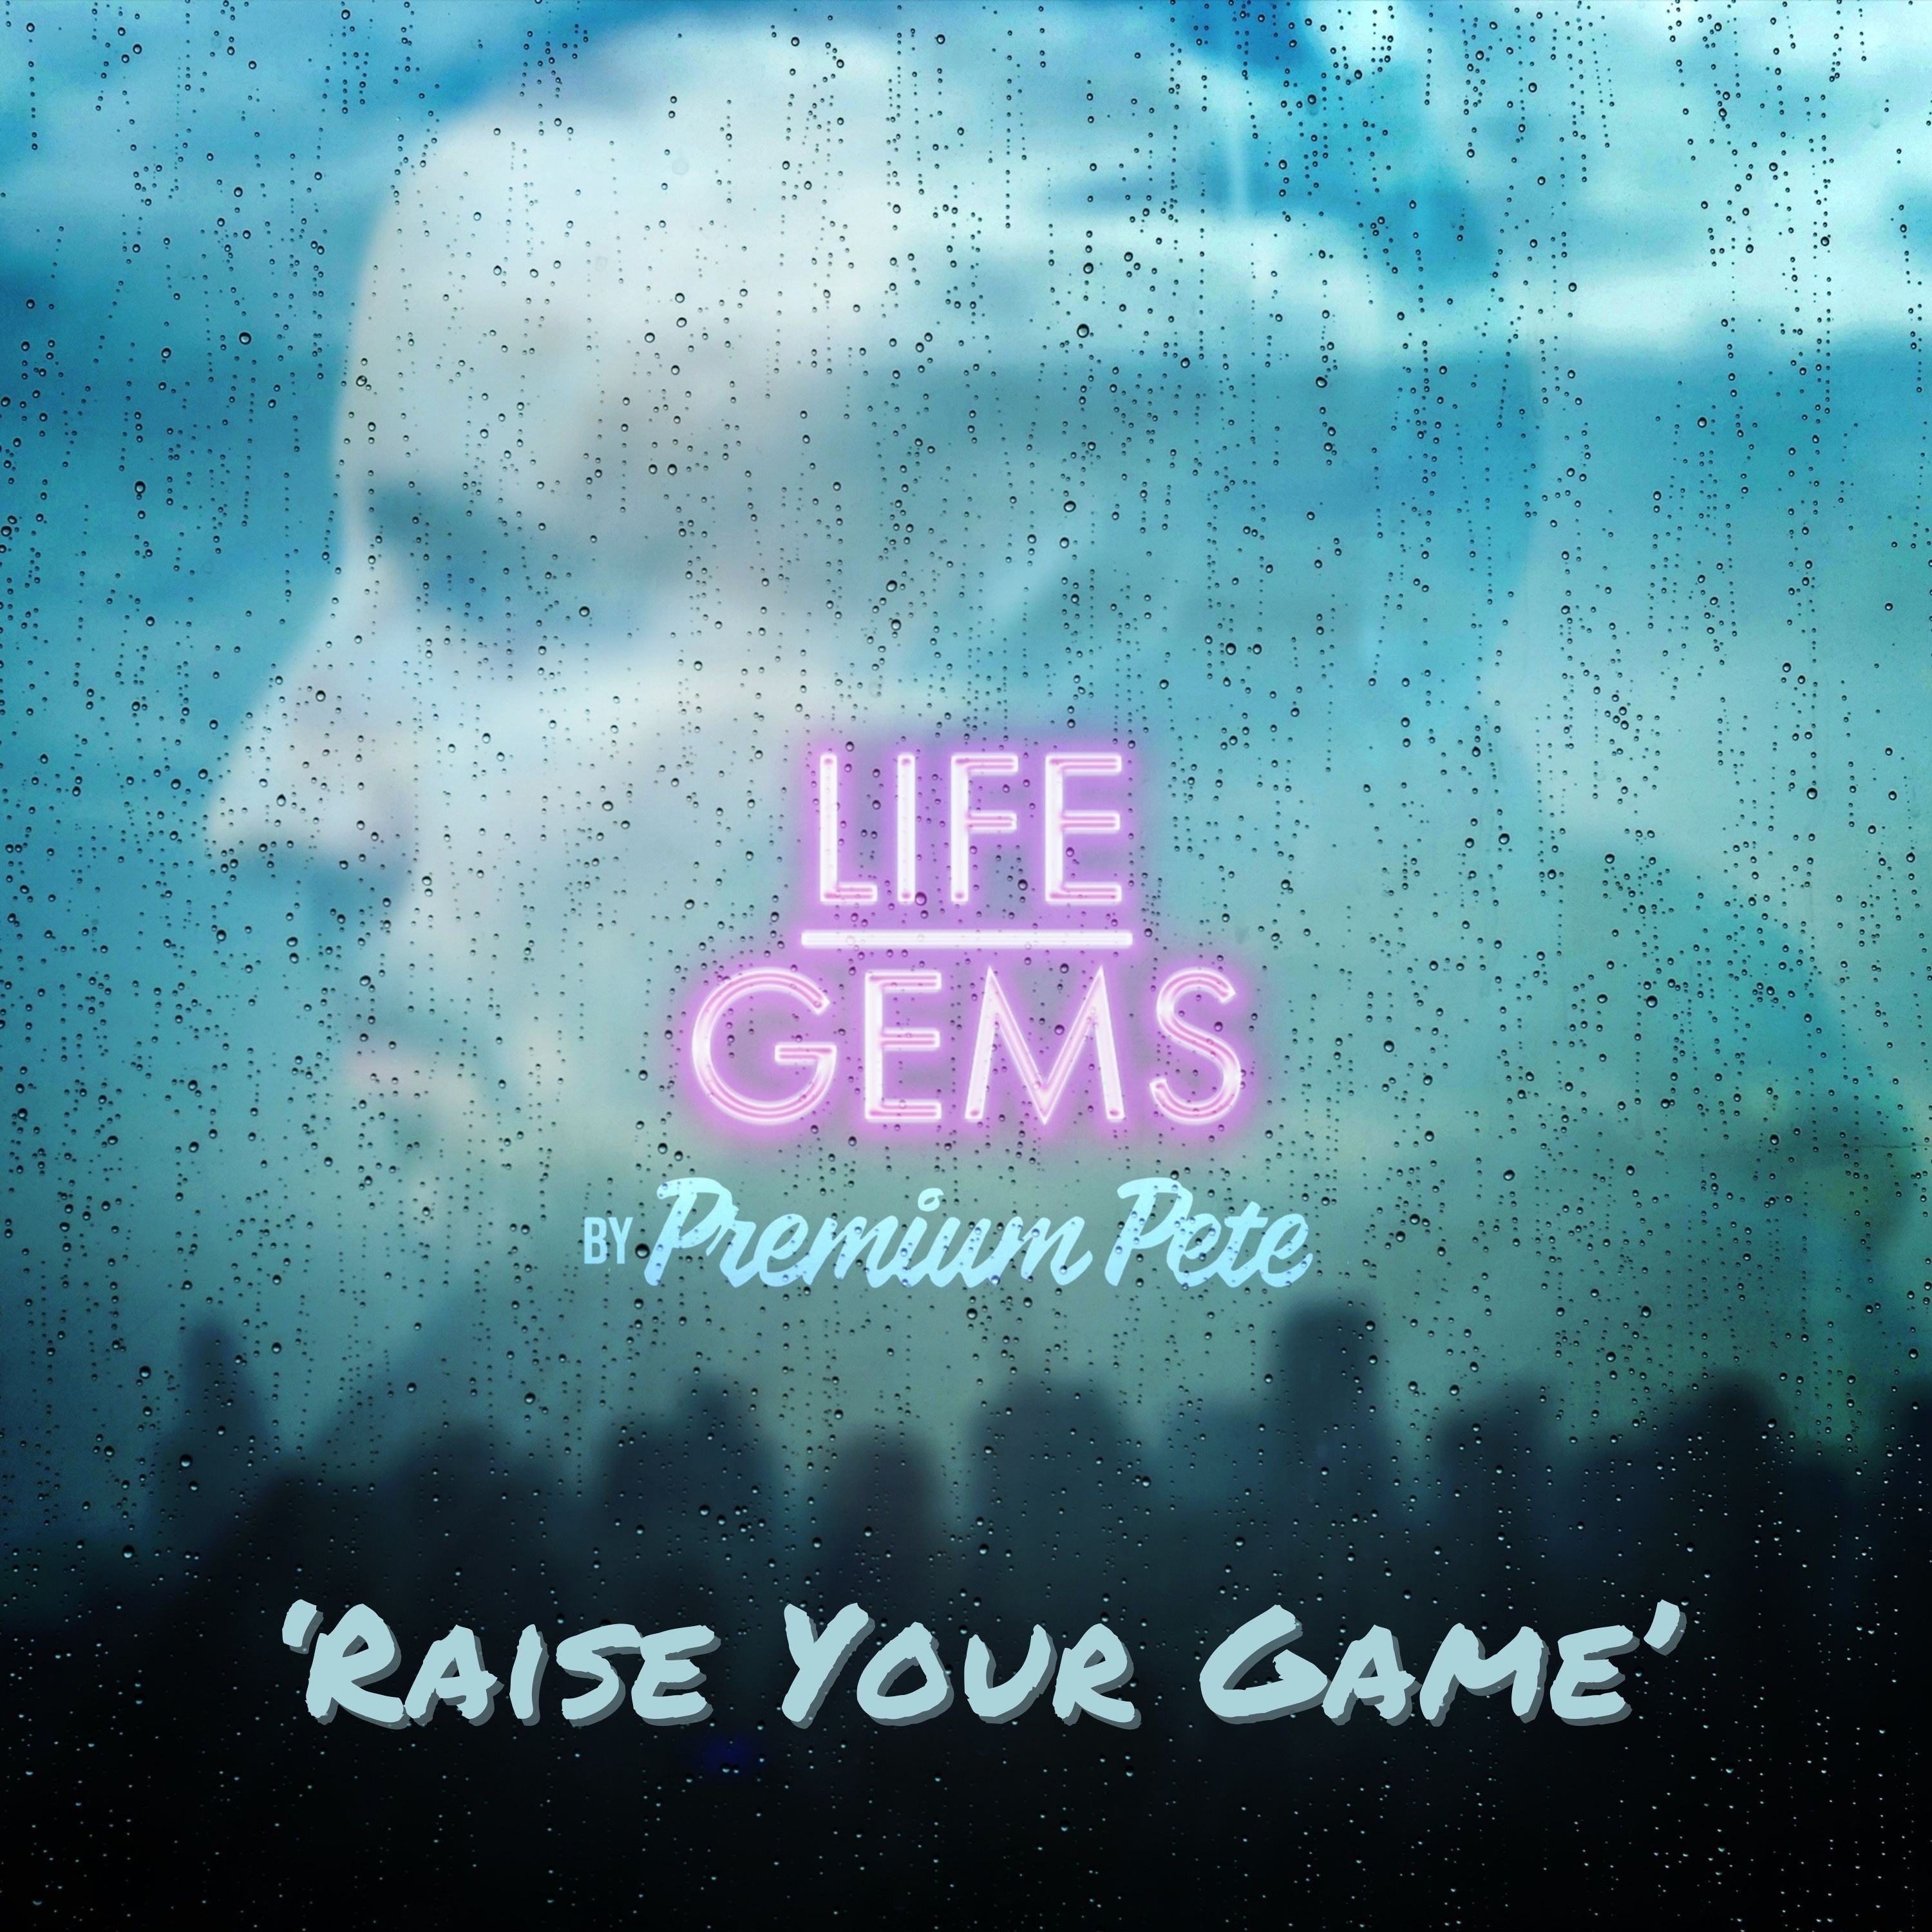 Life Gems ”Raise Your Game”